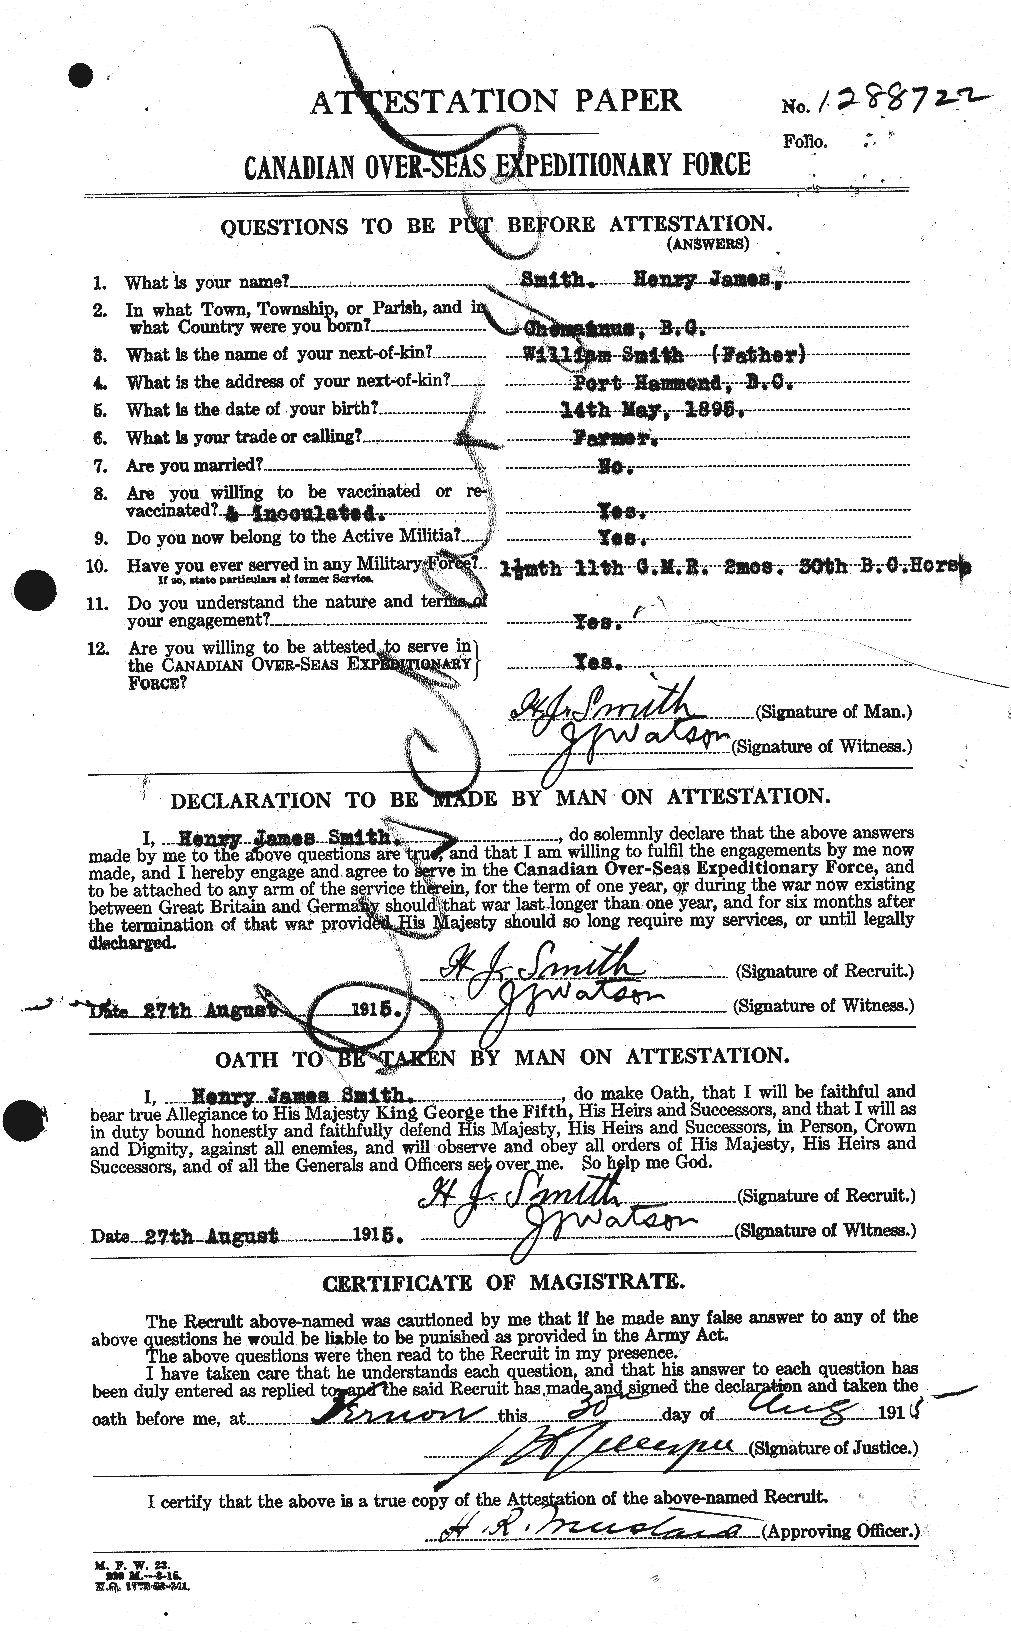 Personnel Records of the First World War - CEF 104698a